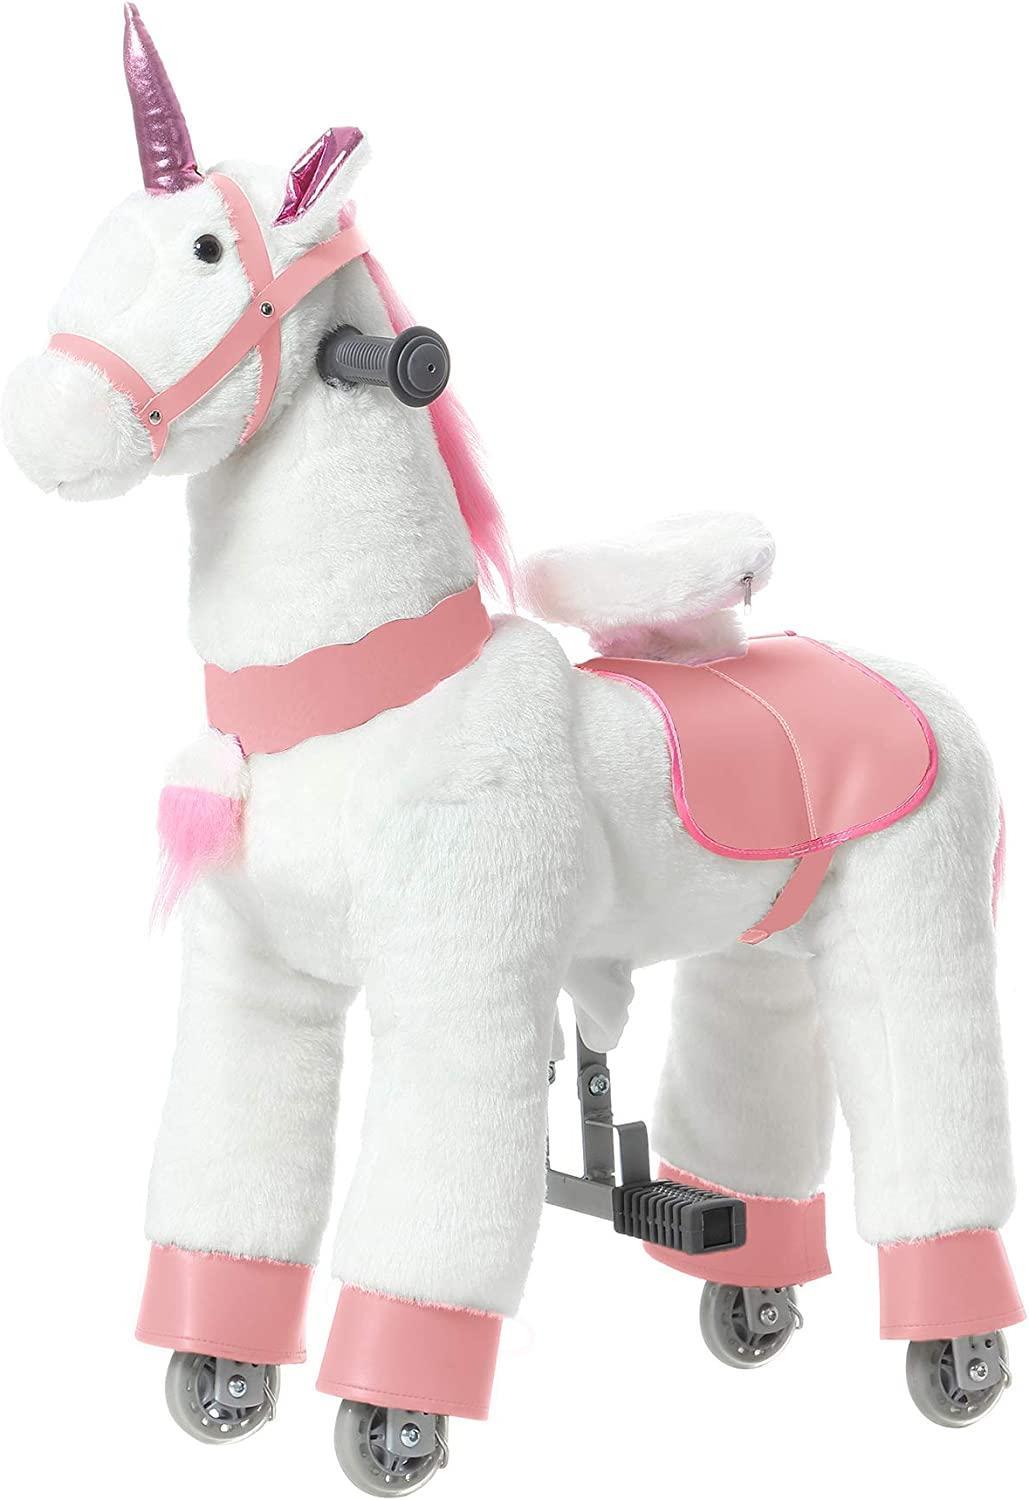 Ride-On Pink Horn Unicorn Horse Push Toy w/Wheels Bounce Toy Horse Rider 3y+ KidsGro (Small Size)